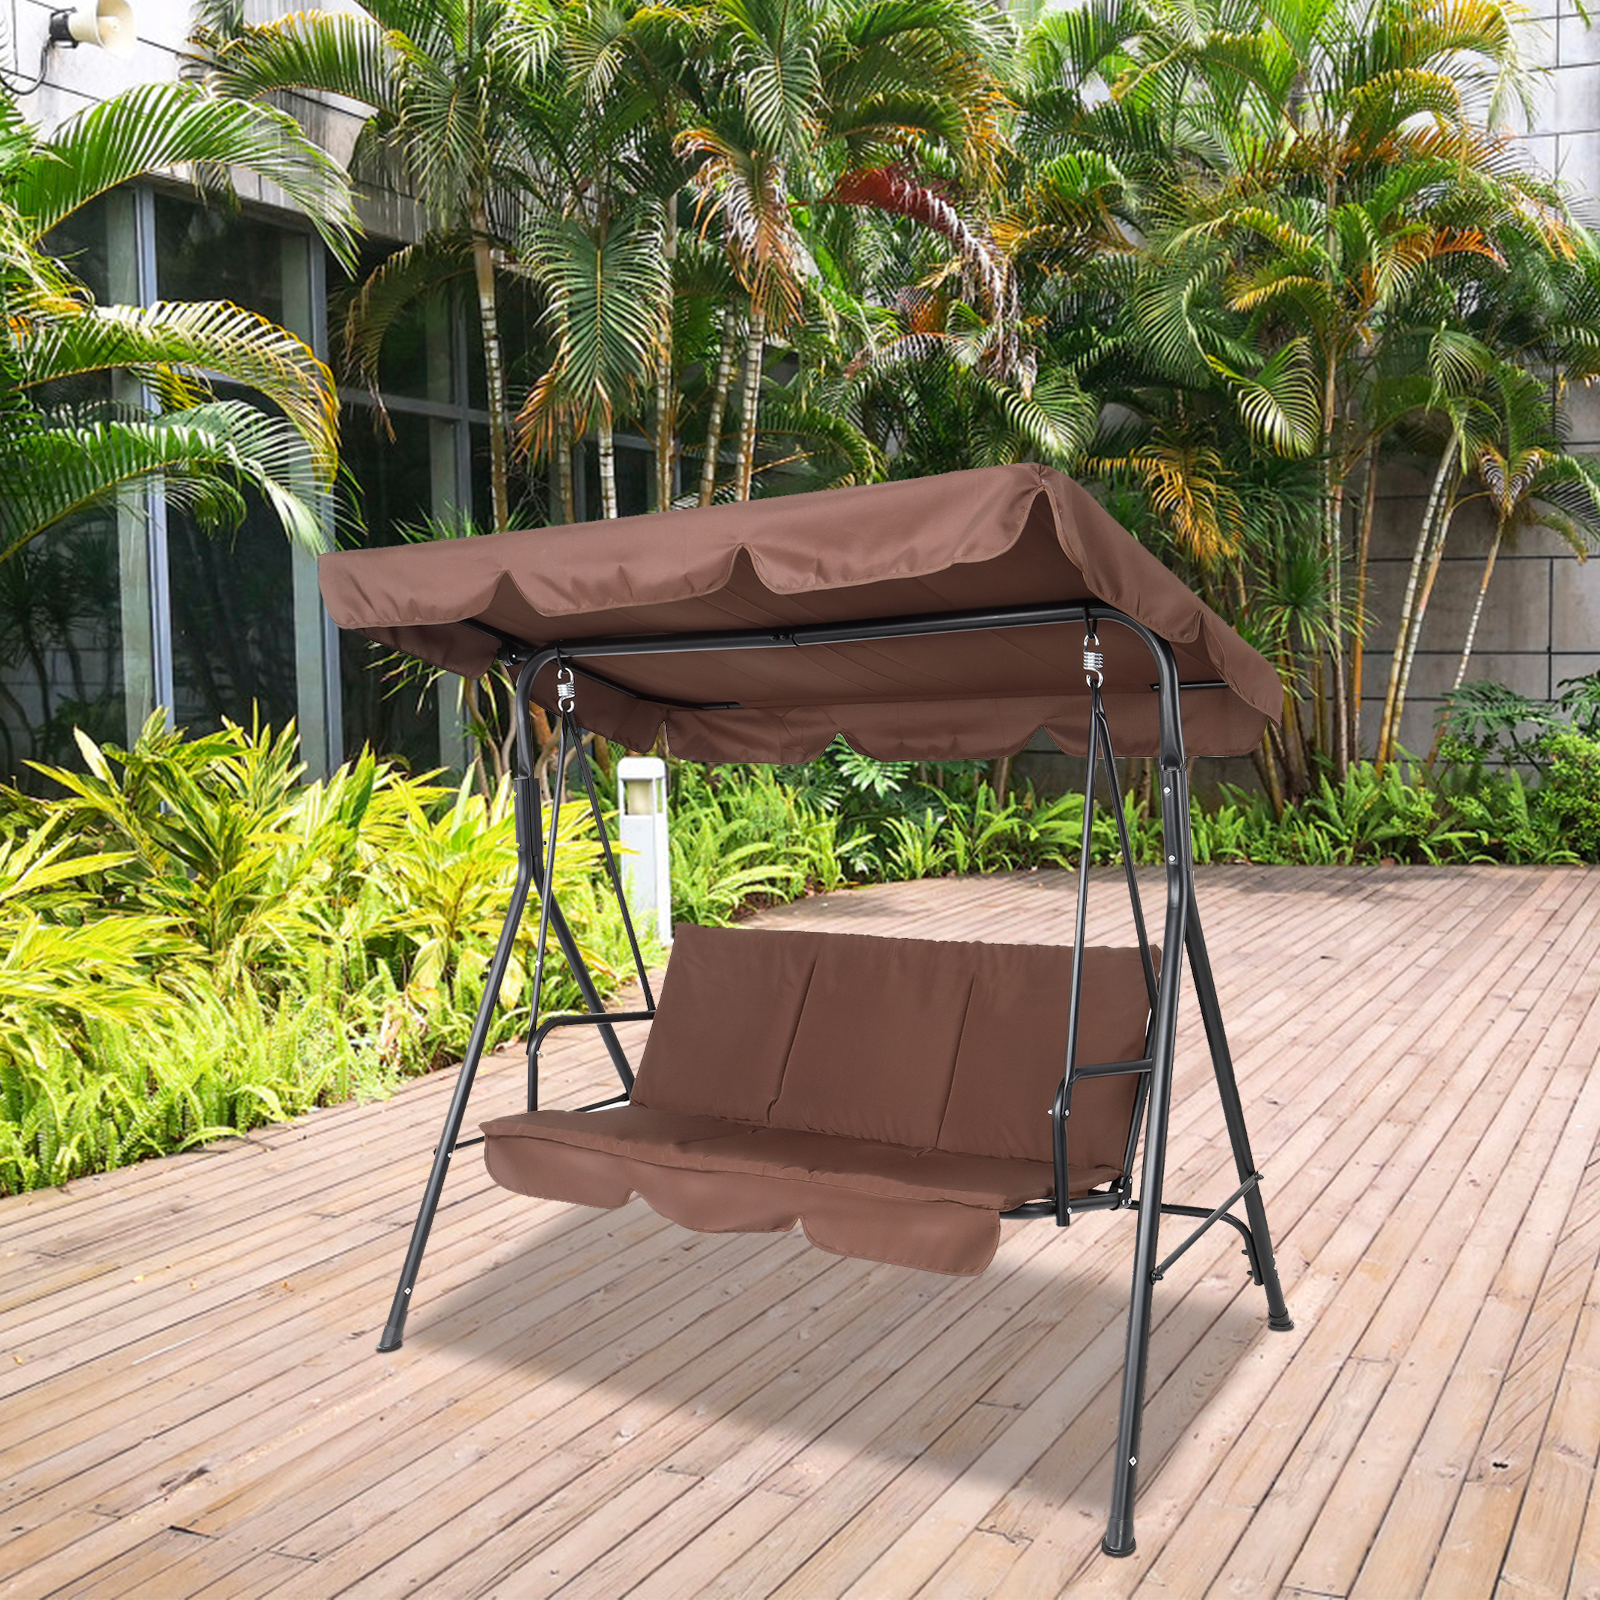 3 Person Outdoor Patio Swing Seat with Adjustable Canopy, All Weather Resistant Hammock Swing Chair W/ Removable Cushions, High Load-Bearing Sunshade Swing for Patio Garden Pool Balcony, T791 - image 3 of 9